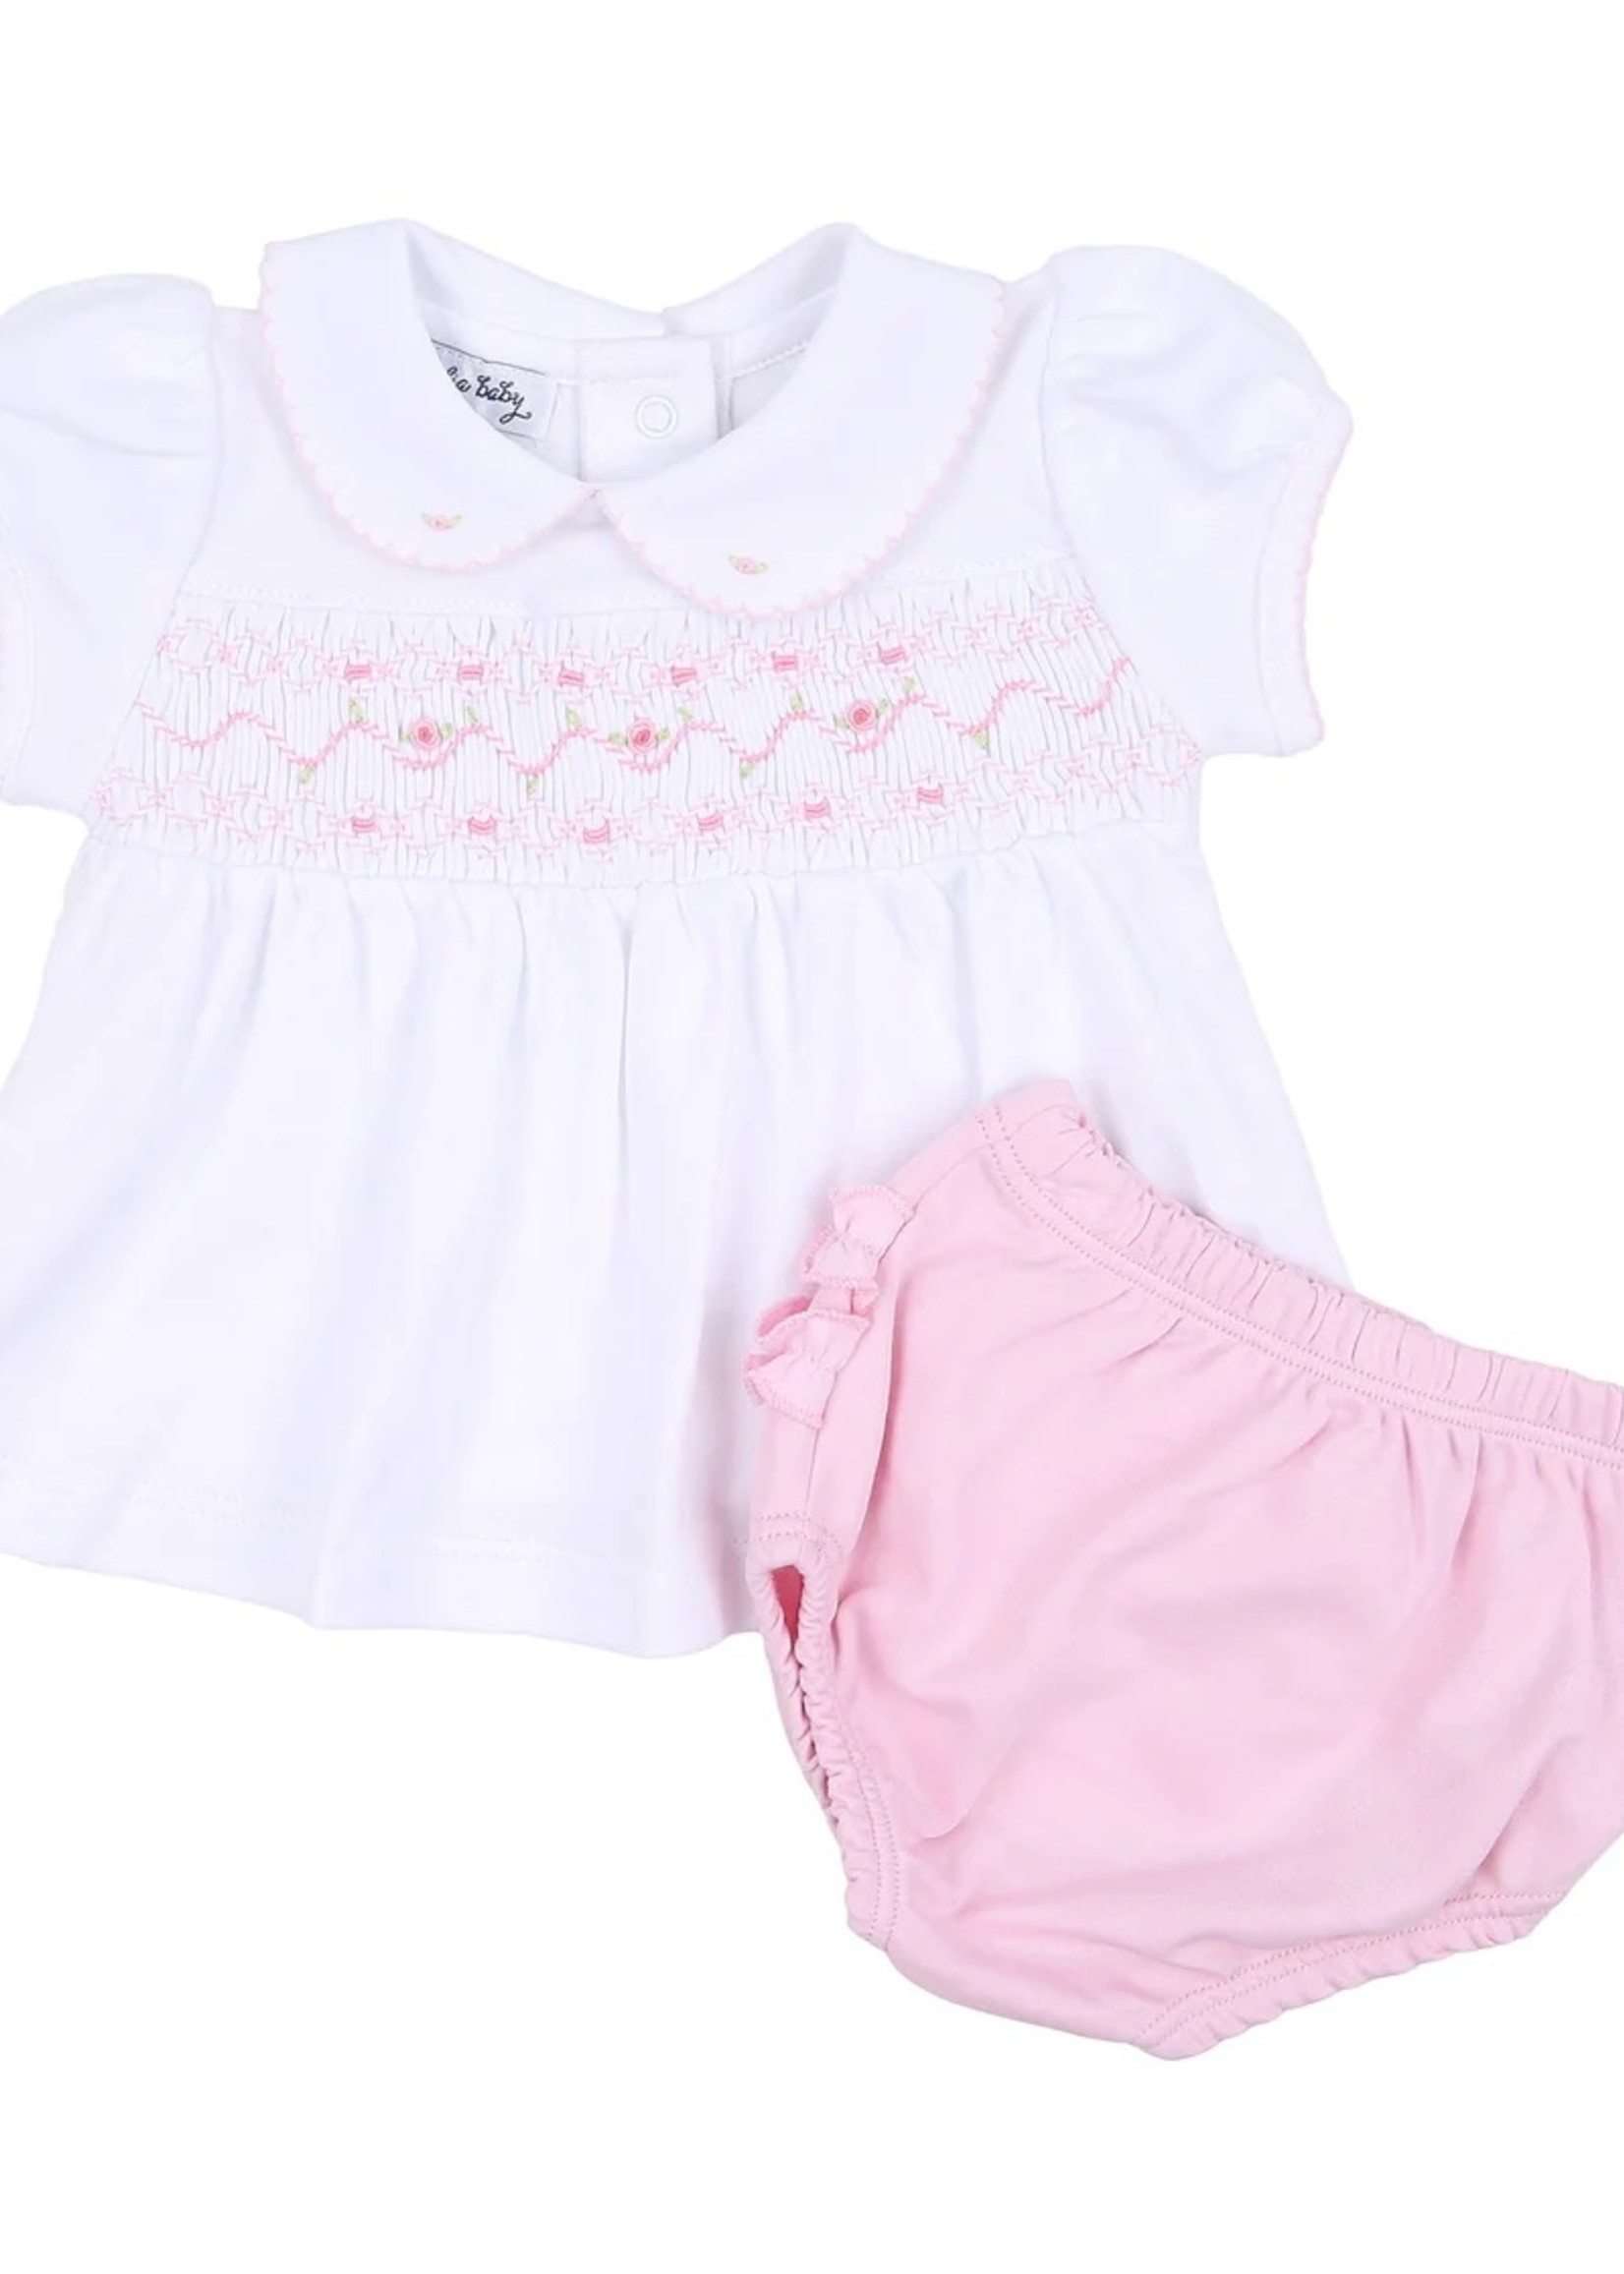 MOLLY AND BRODY RUFFLE DIAPER SET